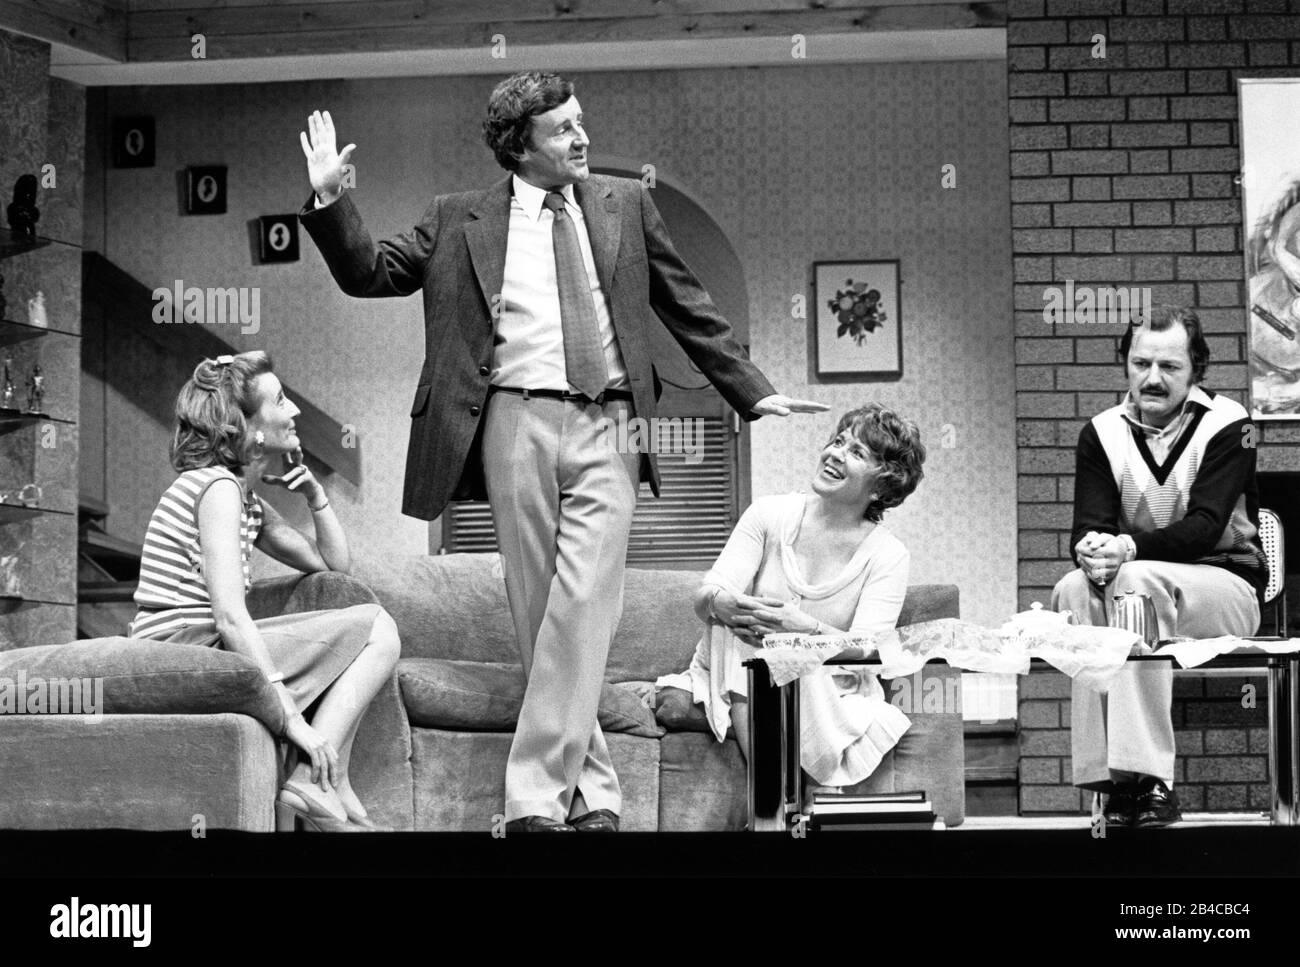 ABSENT FRIENDS   by Alan Ayckbourn   design: Derek Cousins   lighting: Nick Chelton   director: Eric Thompson  l-r: Phyllida Law (Marge), Richard Briers (Colin), Pat Heywood (Diana), Peter Bowles (Paul) Garrick Theatre, London WC2   23/07/1975 Stock Photo